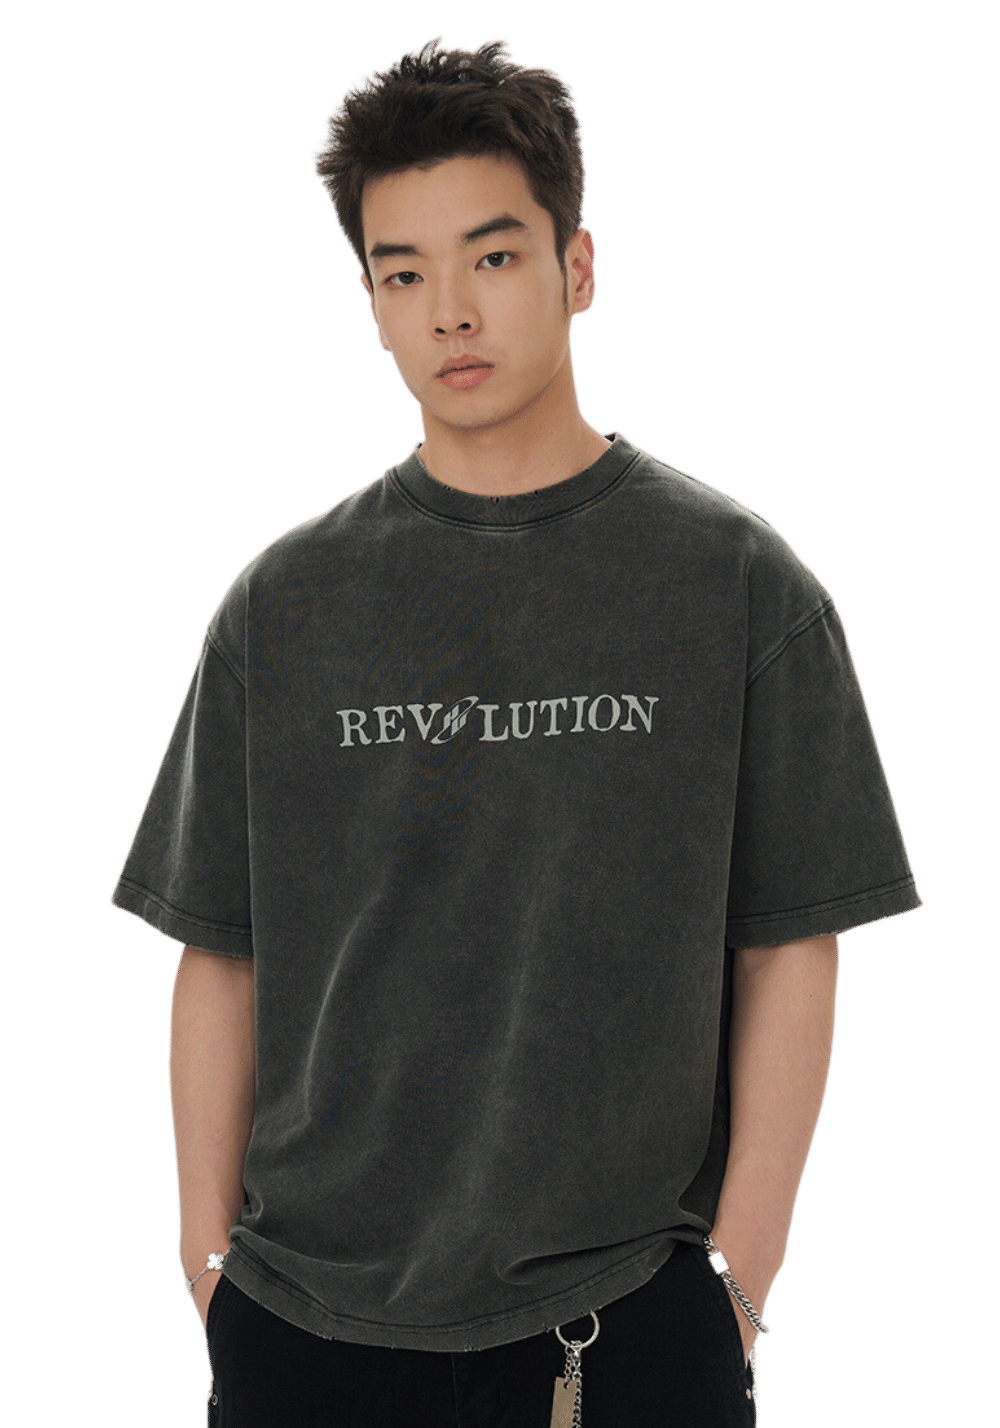 Revolutionary Statue Washed Print T-Shirt - PSYLOS 1, Revolutionary Statue Washed Print T-Shirt, T-Shirt, HARSH AND CRUEL, PSYLOS 1